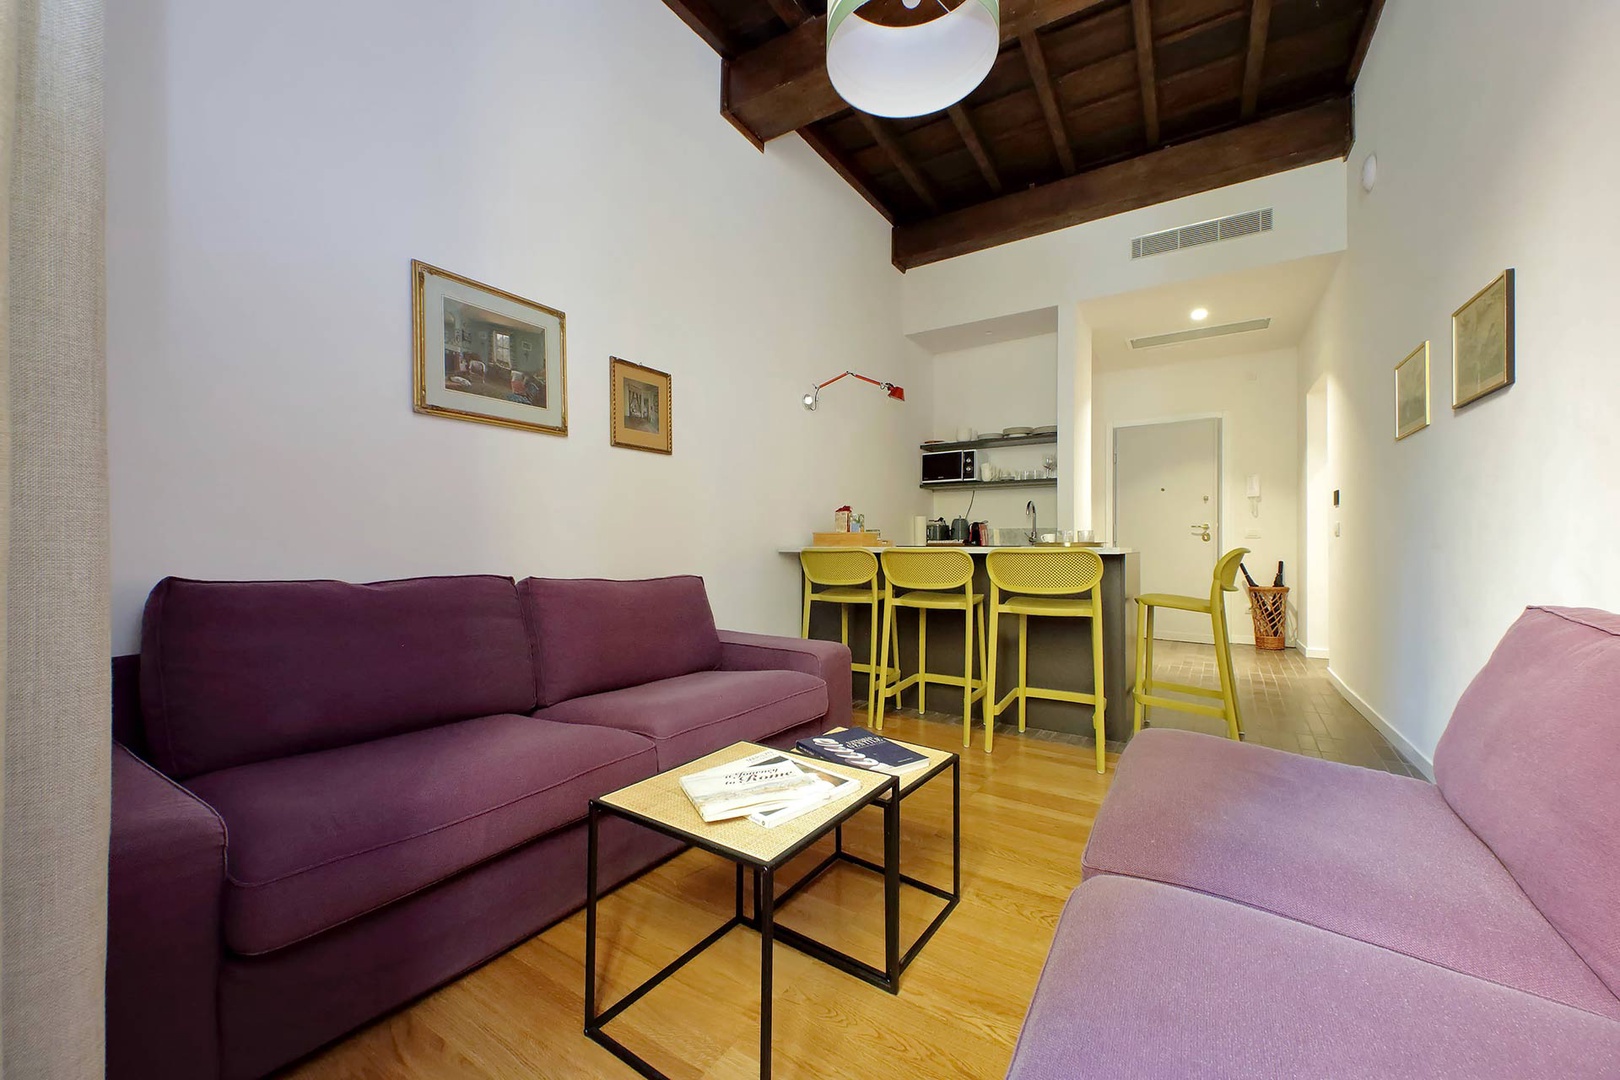 The Rosa is a cozy apartment in a central location in Rome.